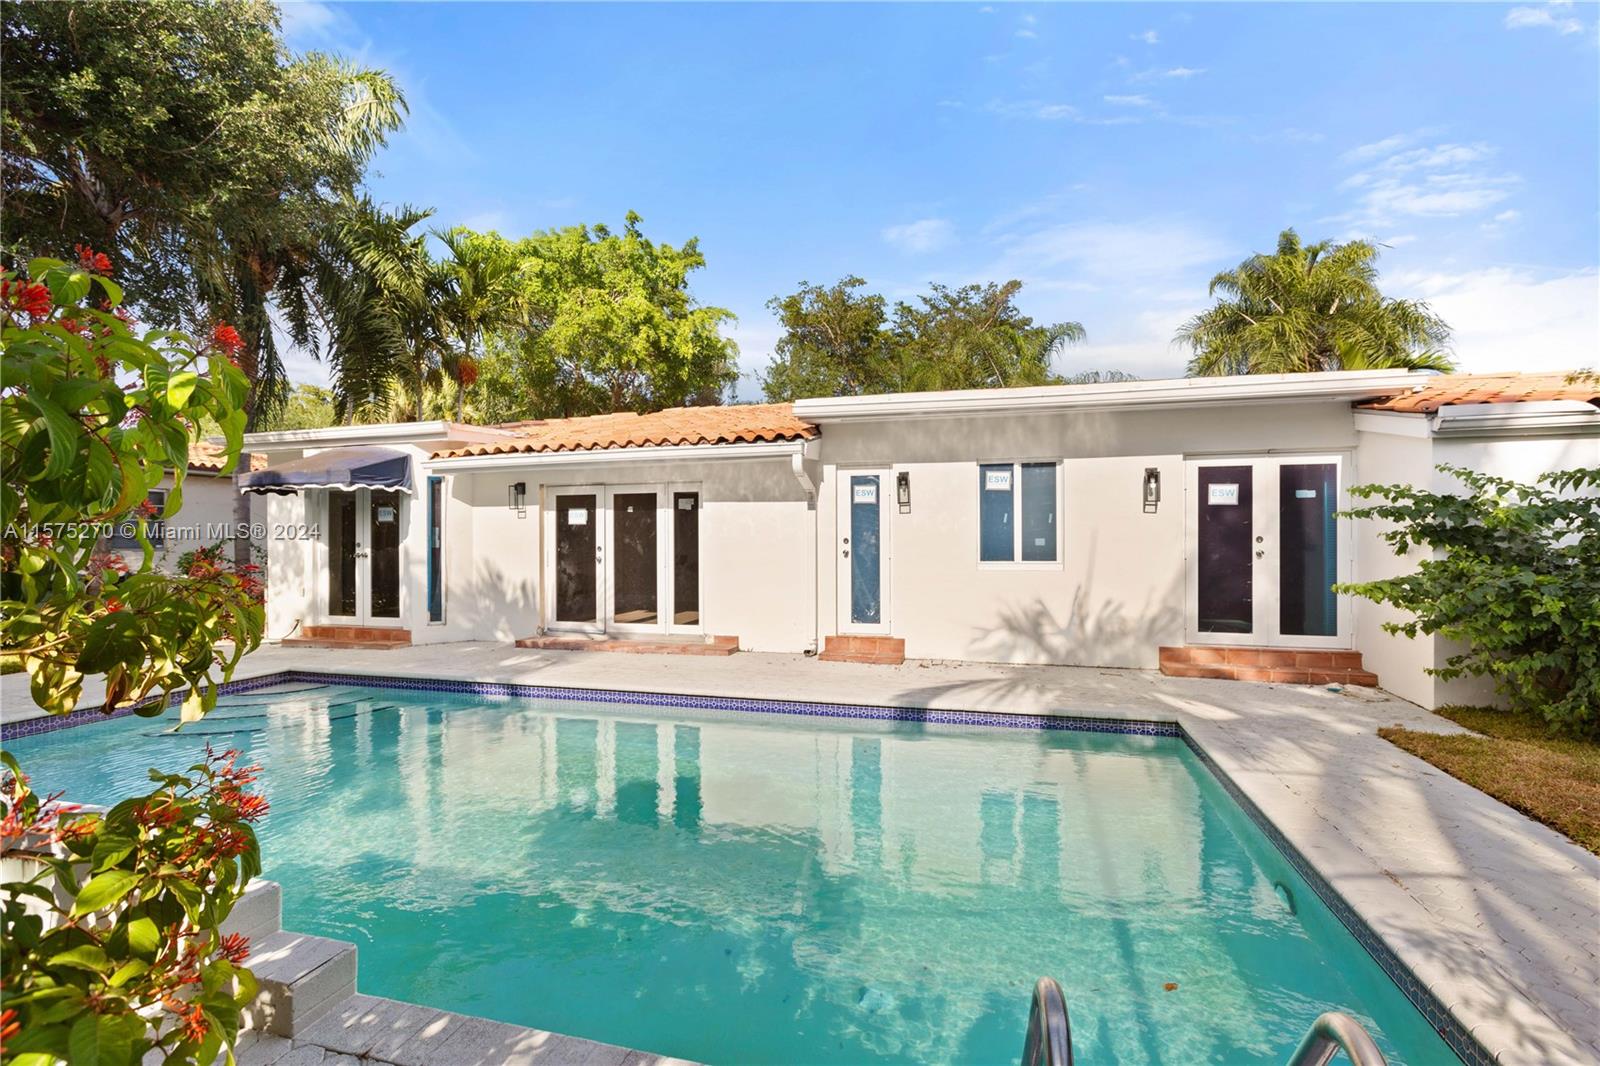 Beautiful home in Coral Gables, recently updated with new hardwood floors, new kitchen, new impact windows, new bathroom and lush landscaping. High vaulted ceilings, large kitchen and breakfast area, spacious master bedroom with walk-in closet and a large and sparkling pool. A must see, E-Z to show!